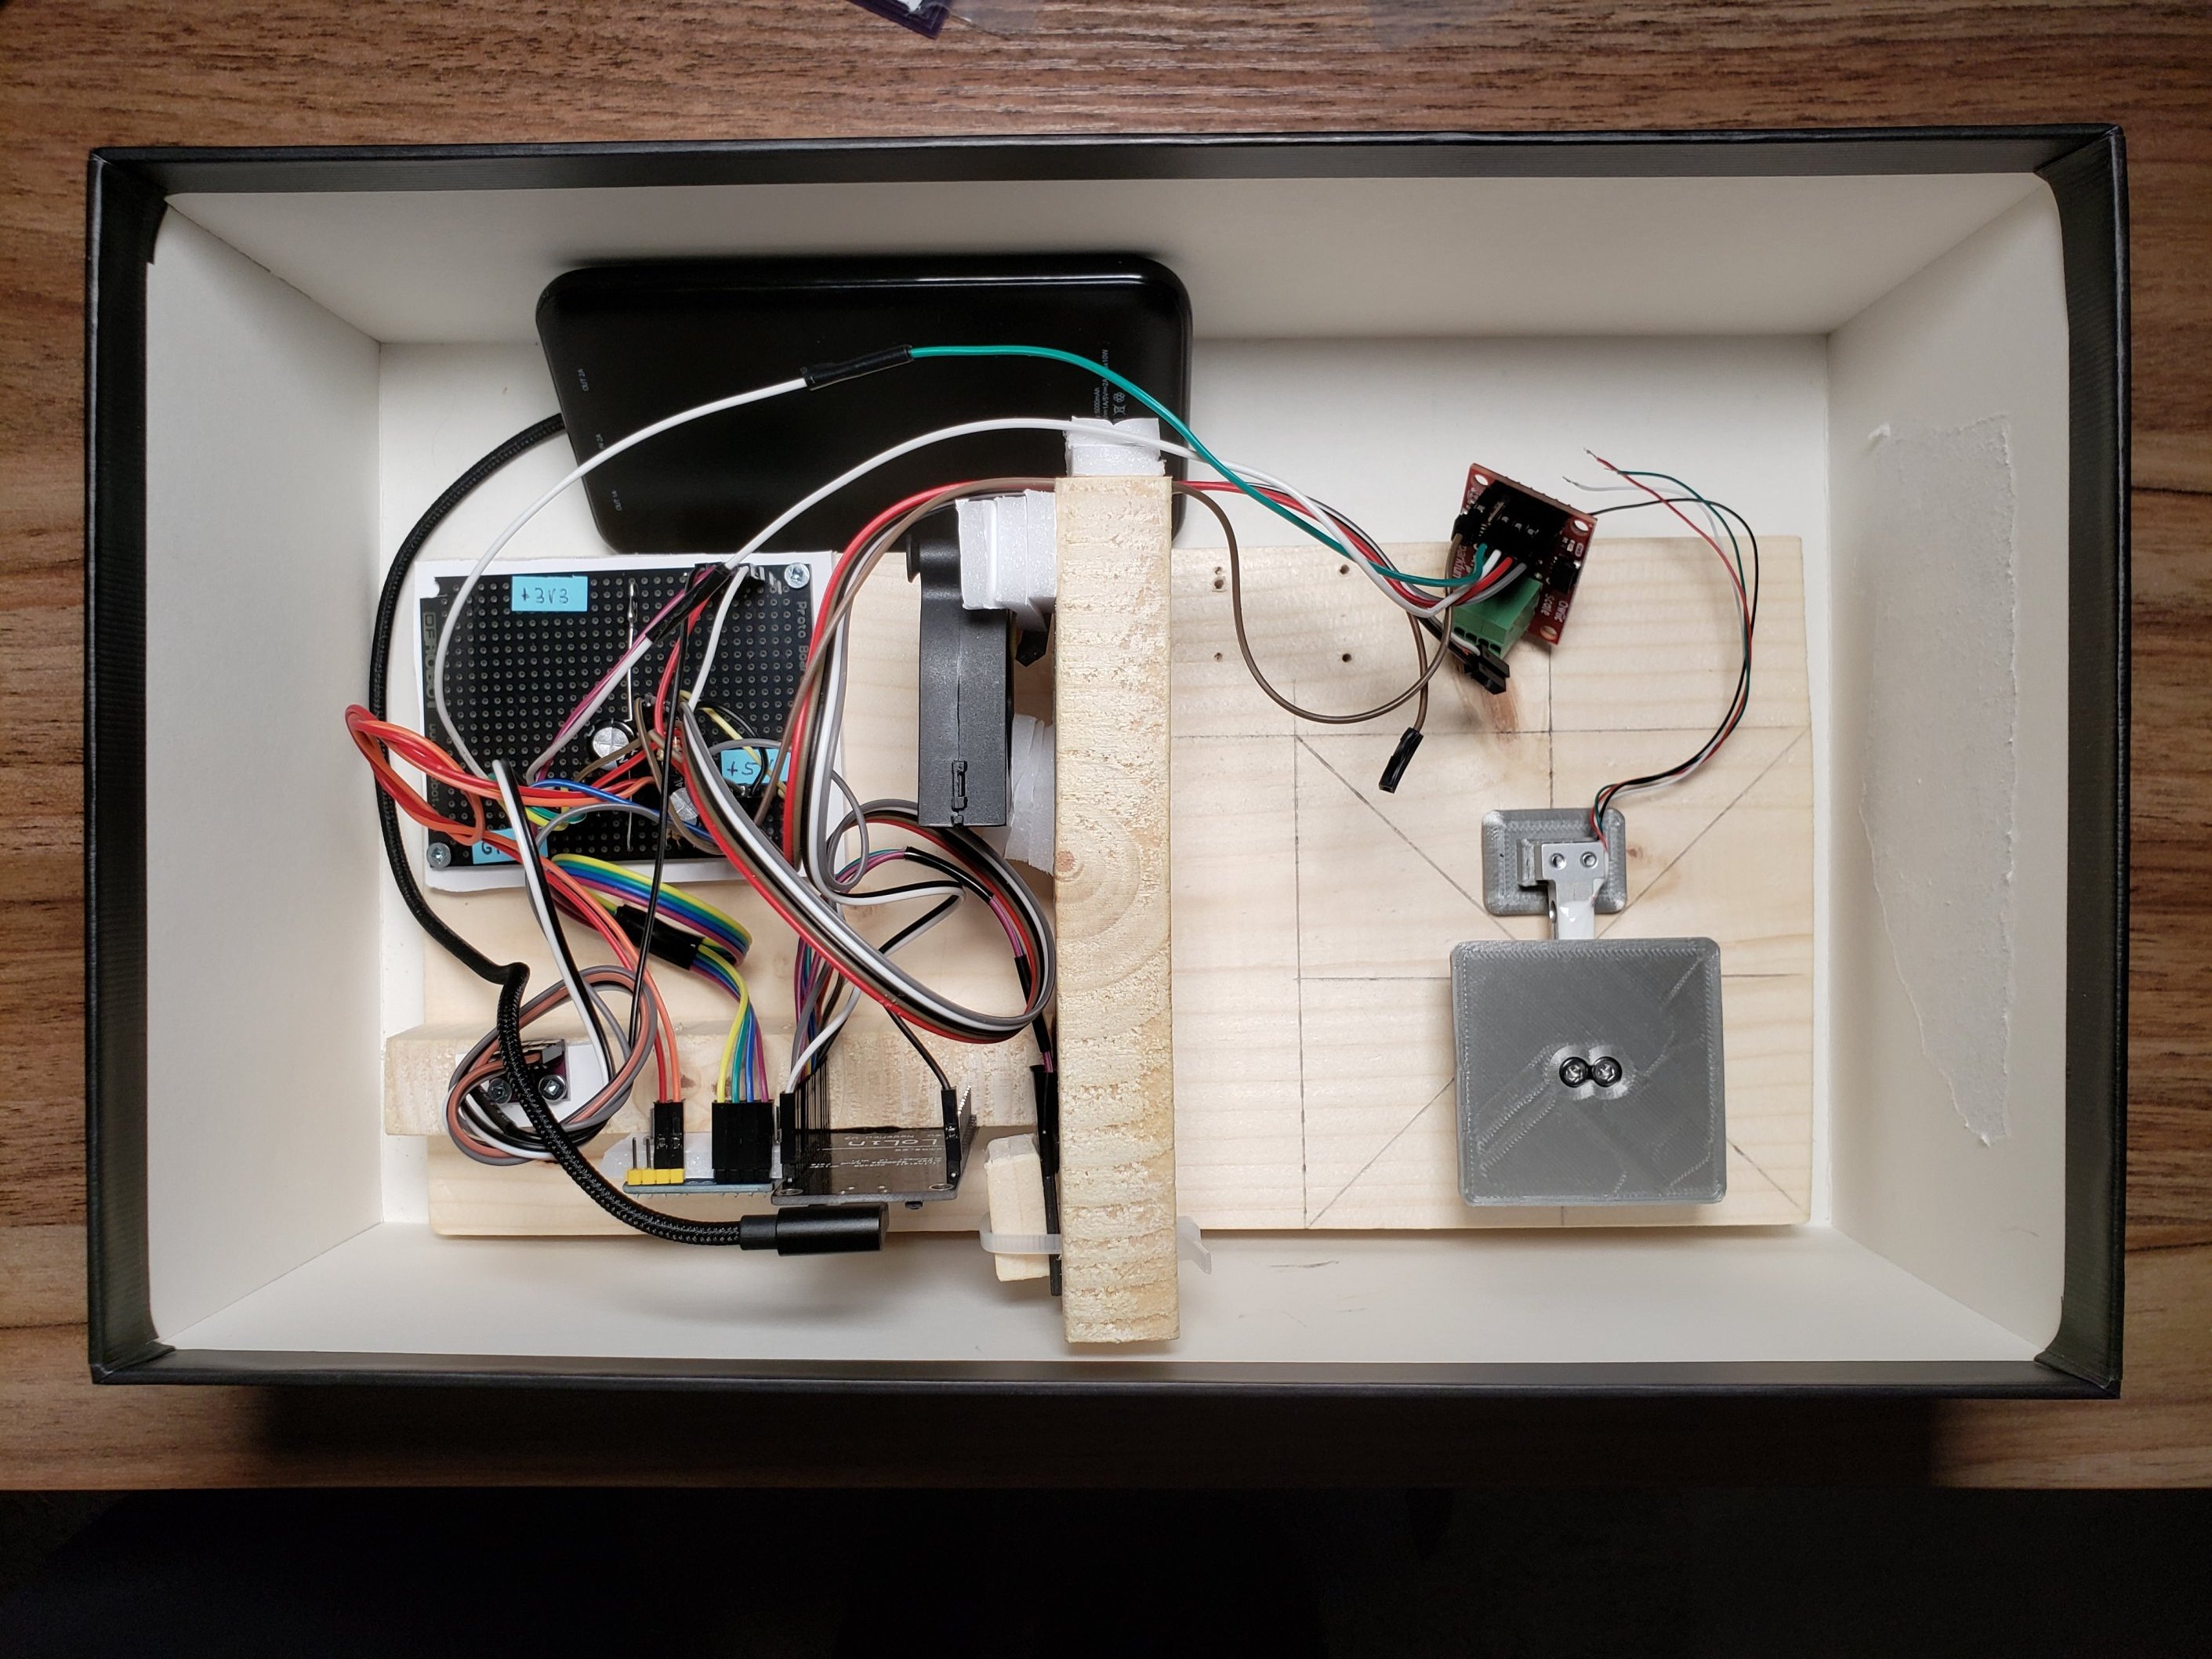 Top view of the whole data logger. On the left majority of the electronics, on the right load cell with ADC (temporarily disconnected).